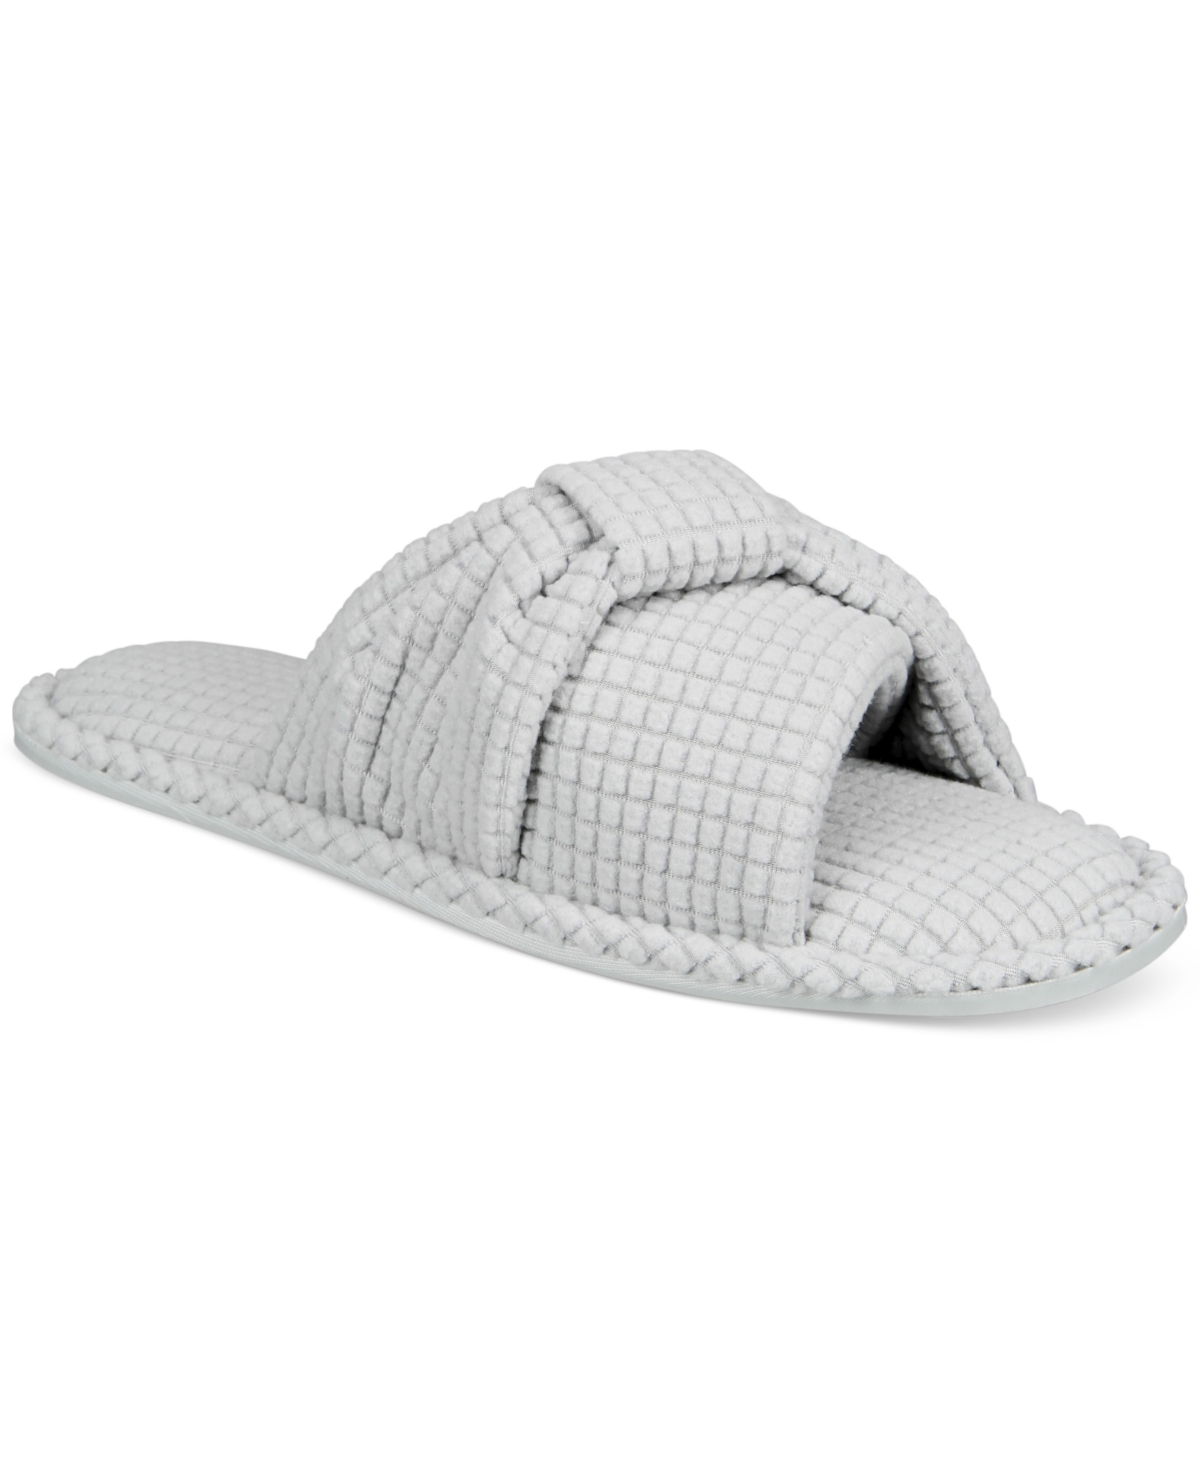 Women's Textured Knot-Top Slippers, Created for Macy's - Pink Taffy